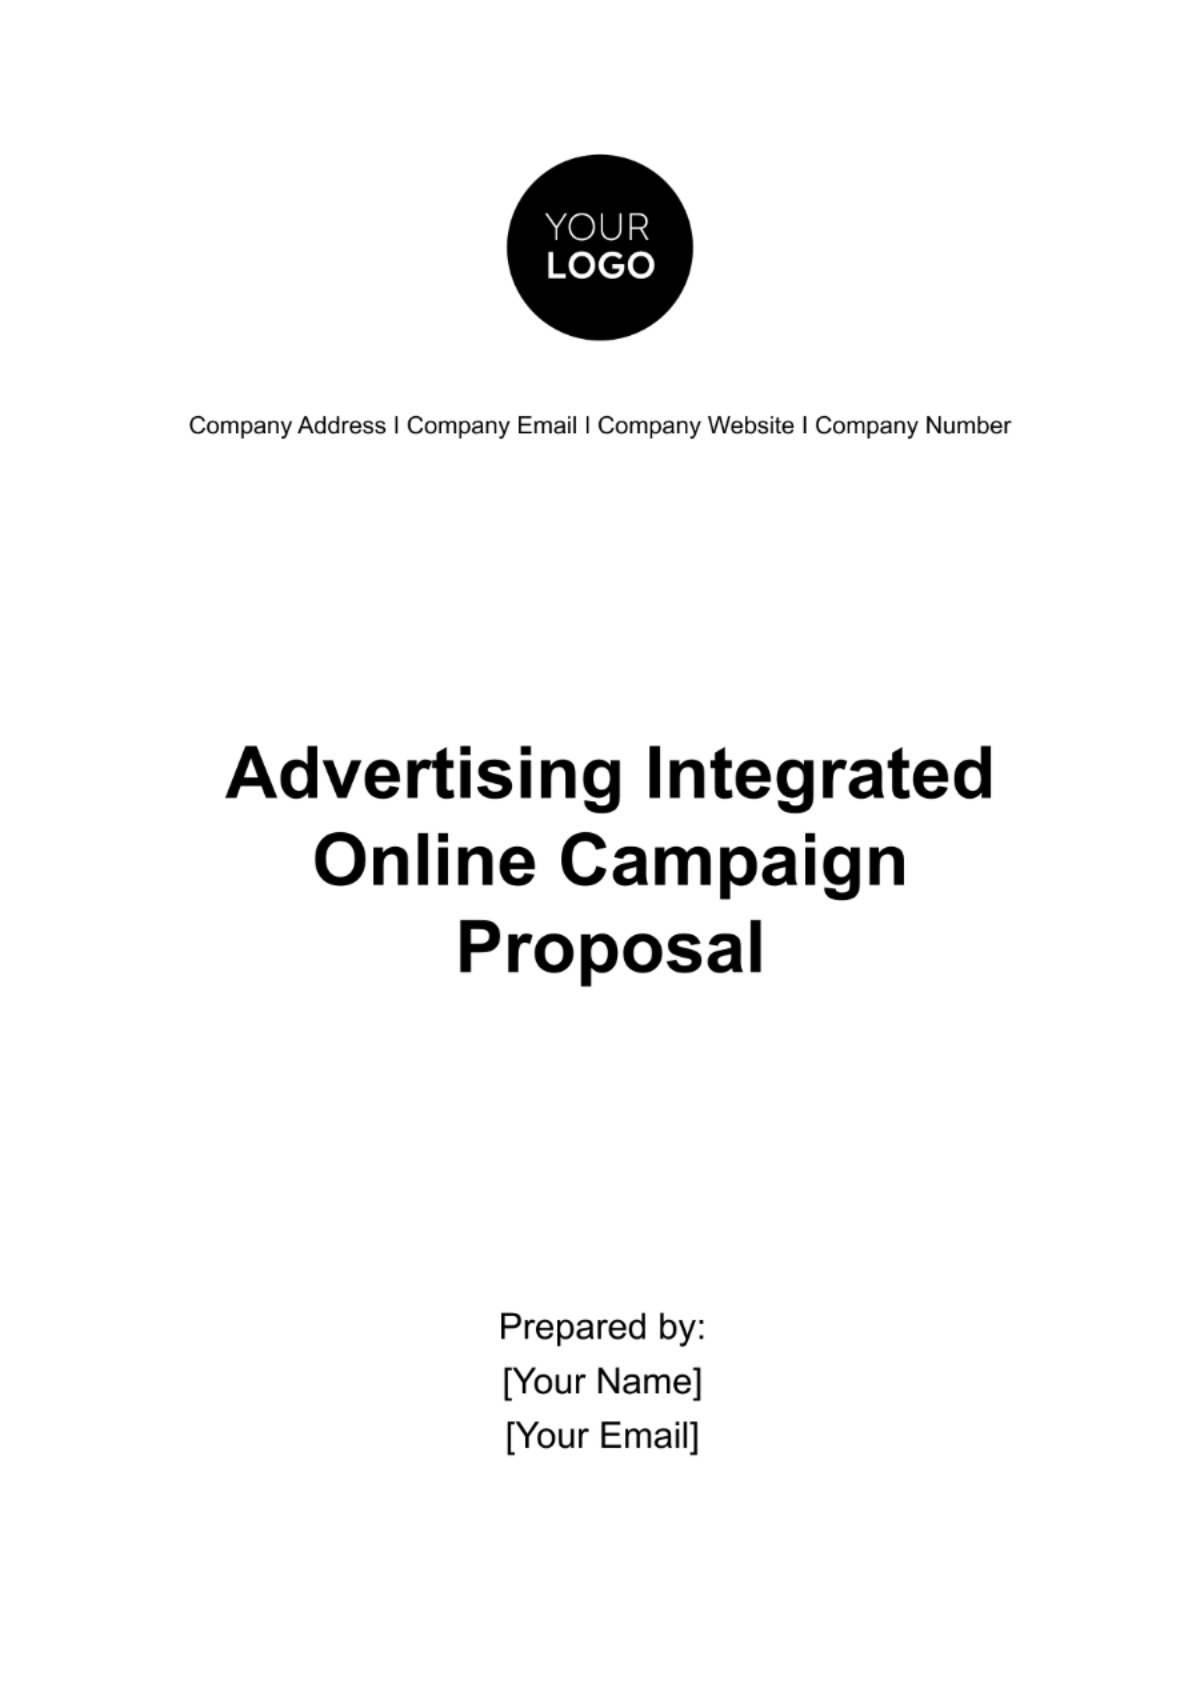 Free Advertising Integrated Online Campaign Proposal Template